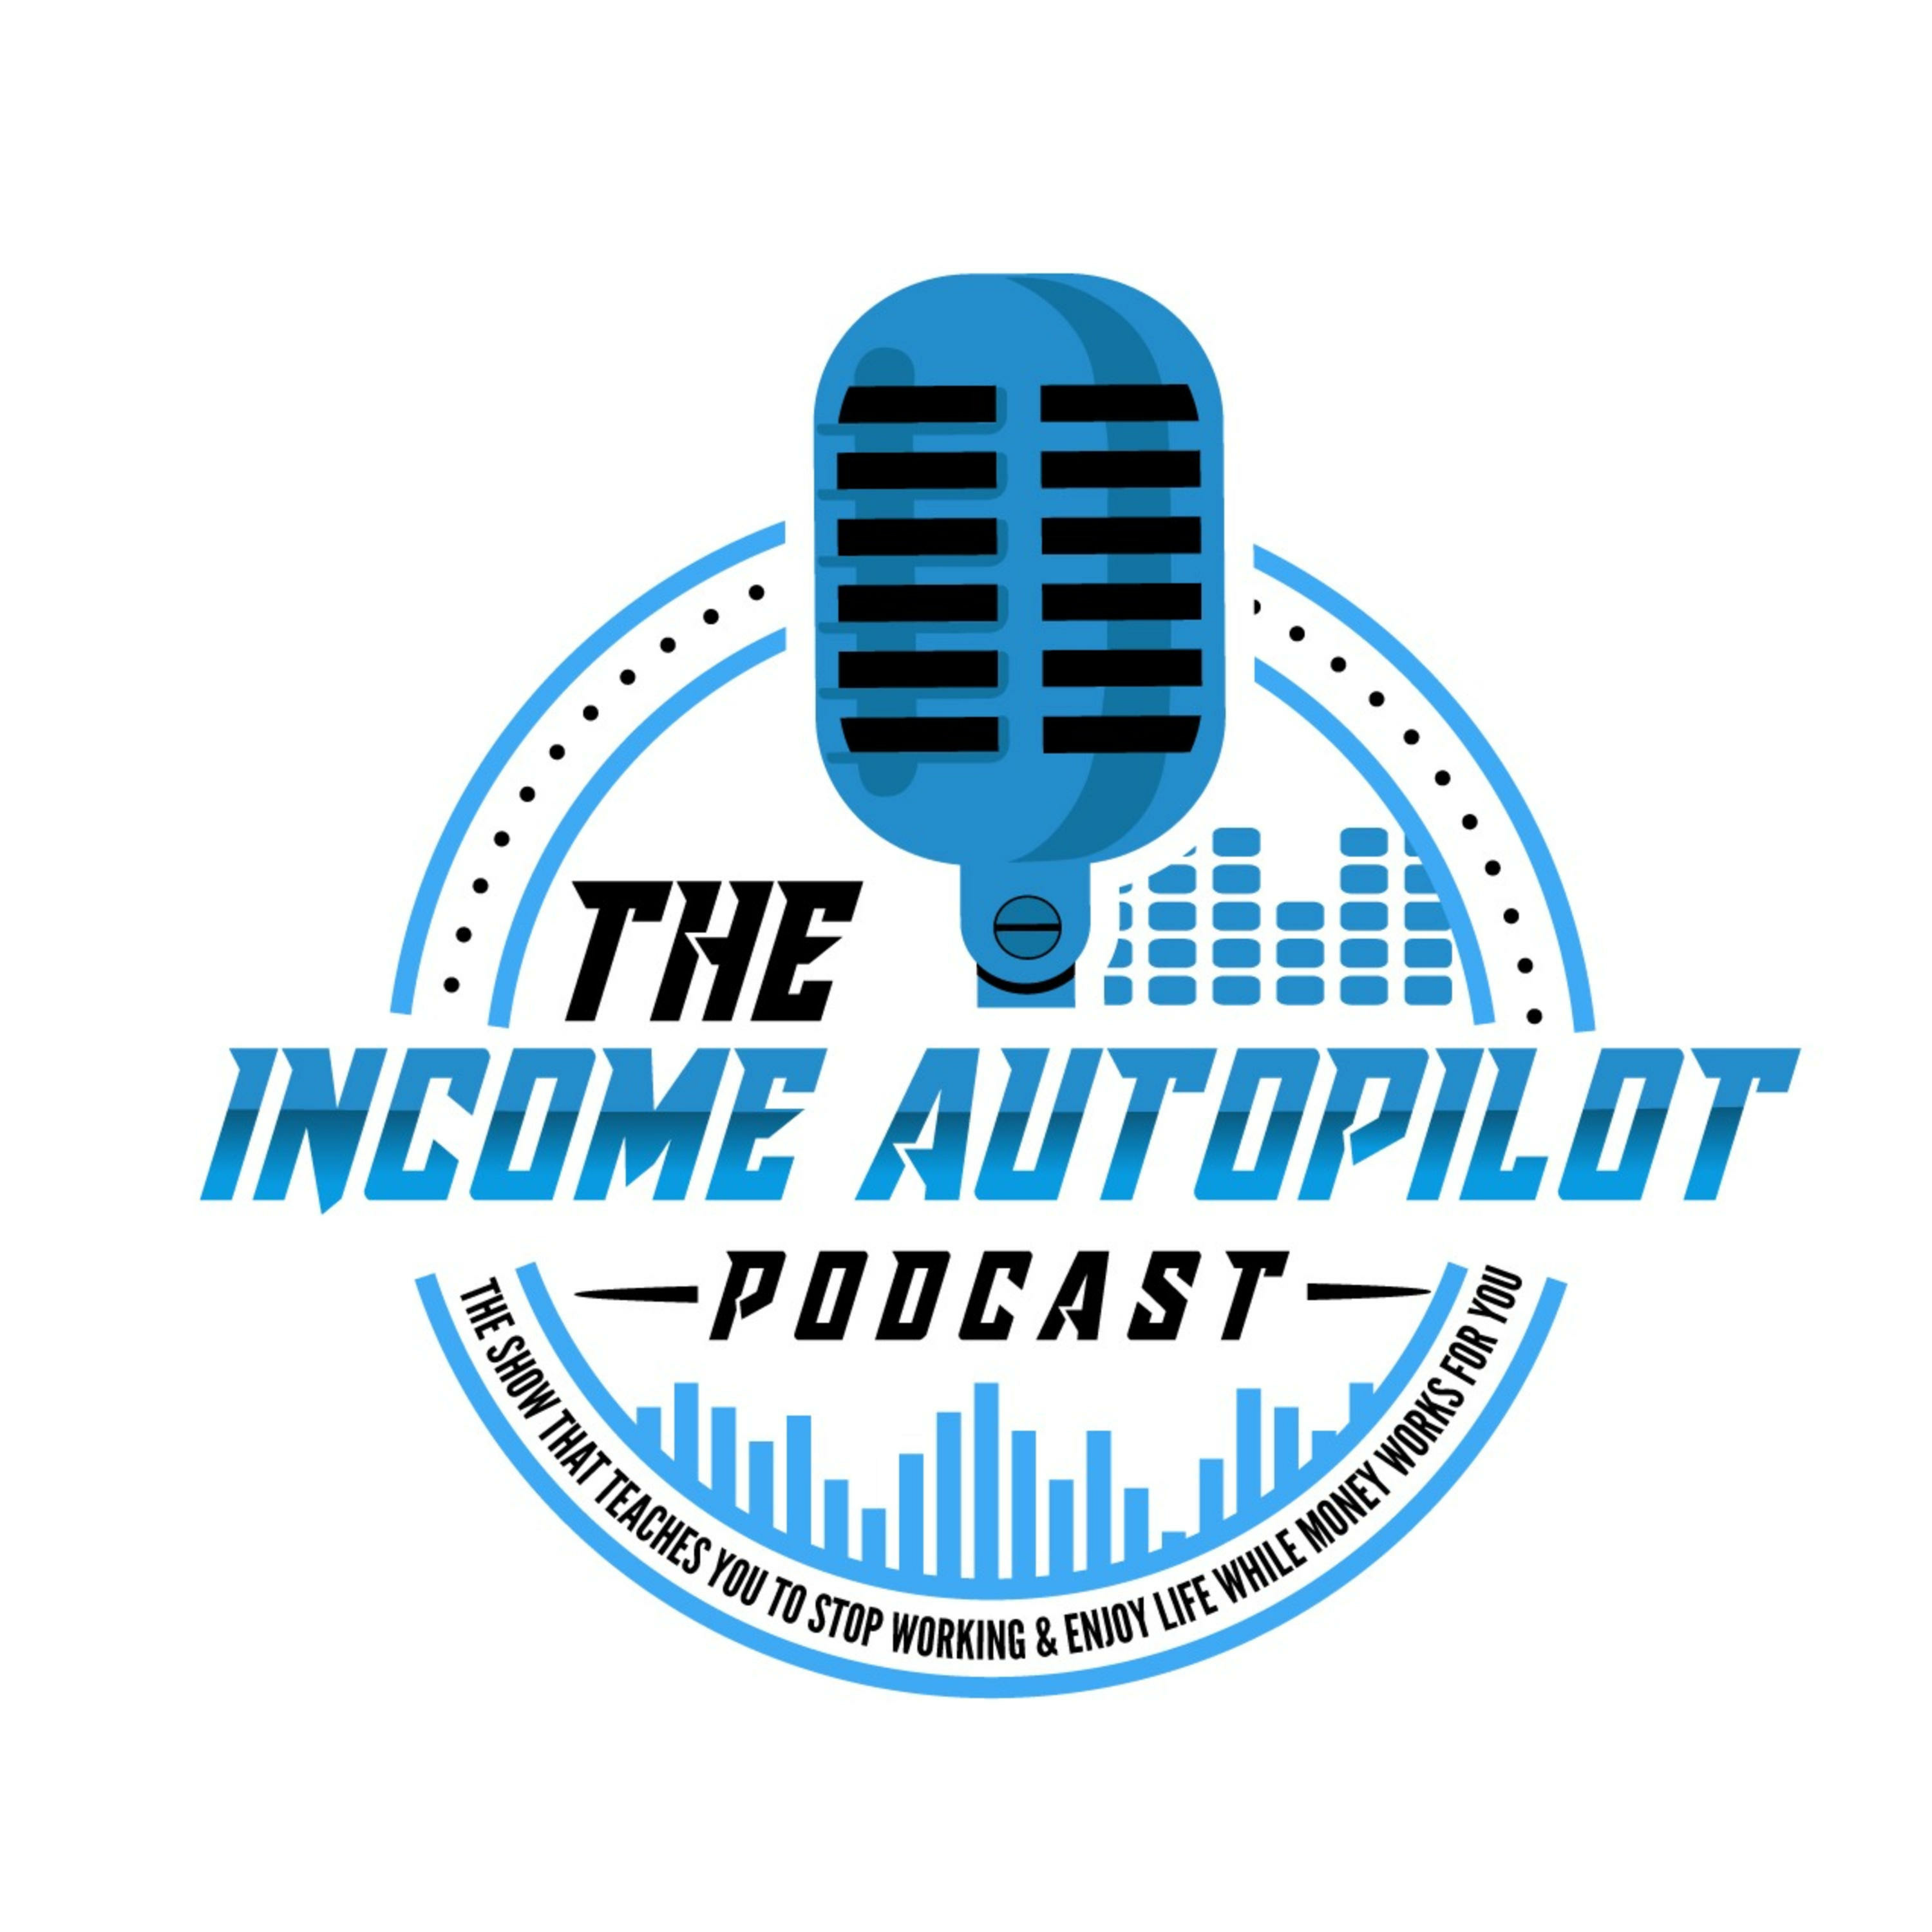 Ep. 10 - 4 Ways To Acquire Real Estate With No Money & Bad Credit